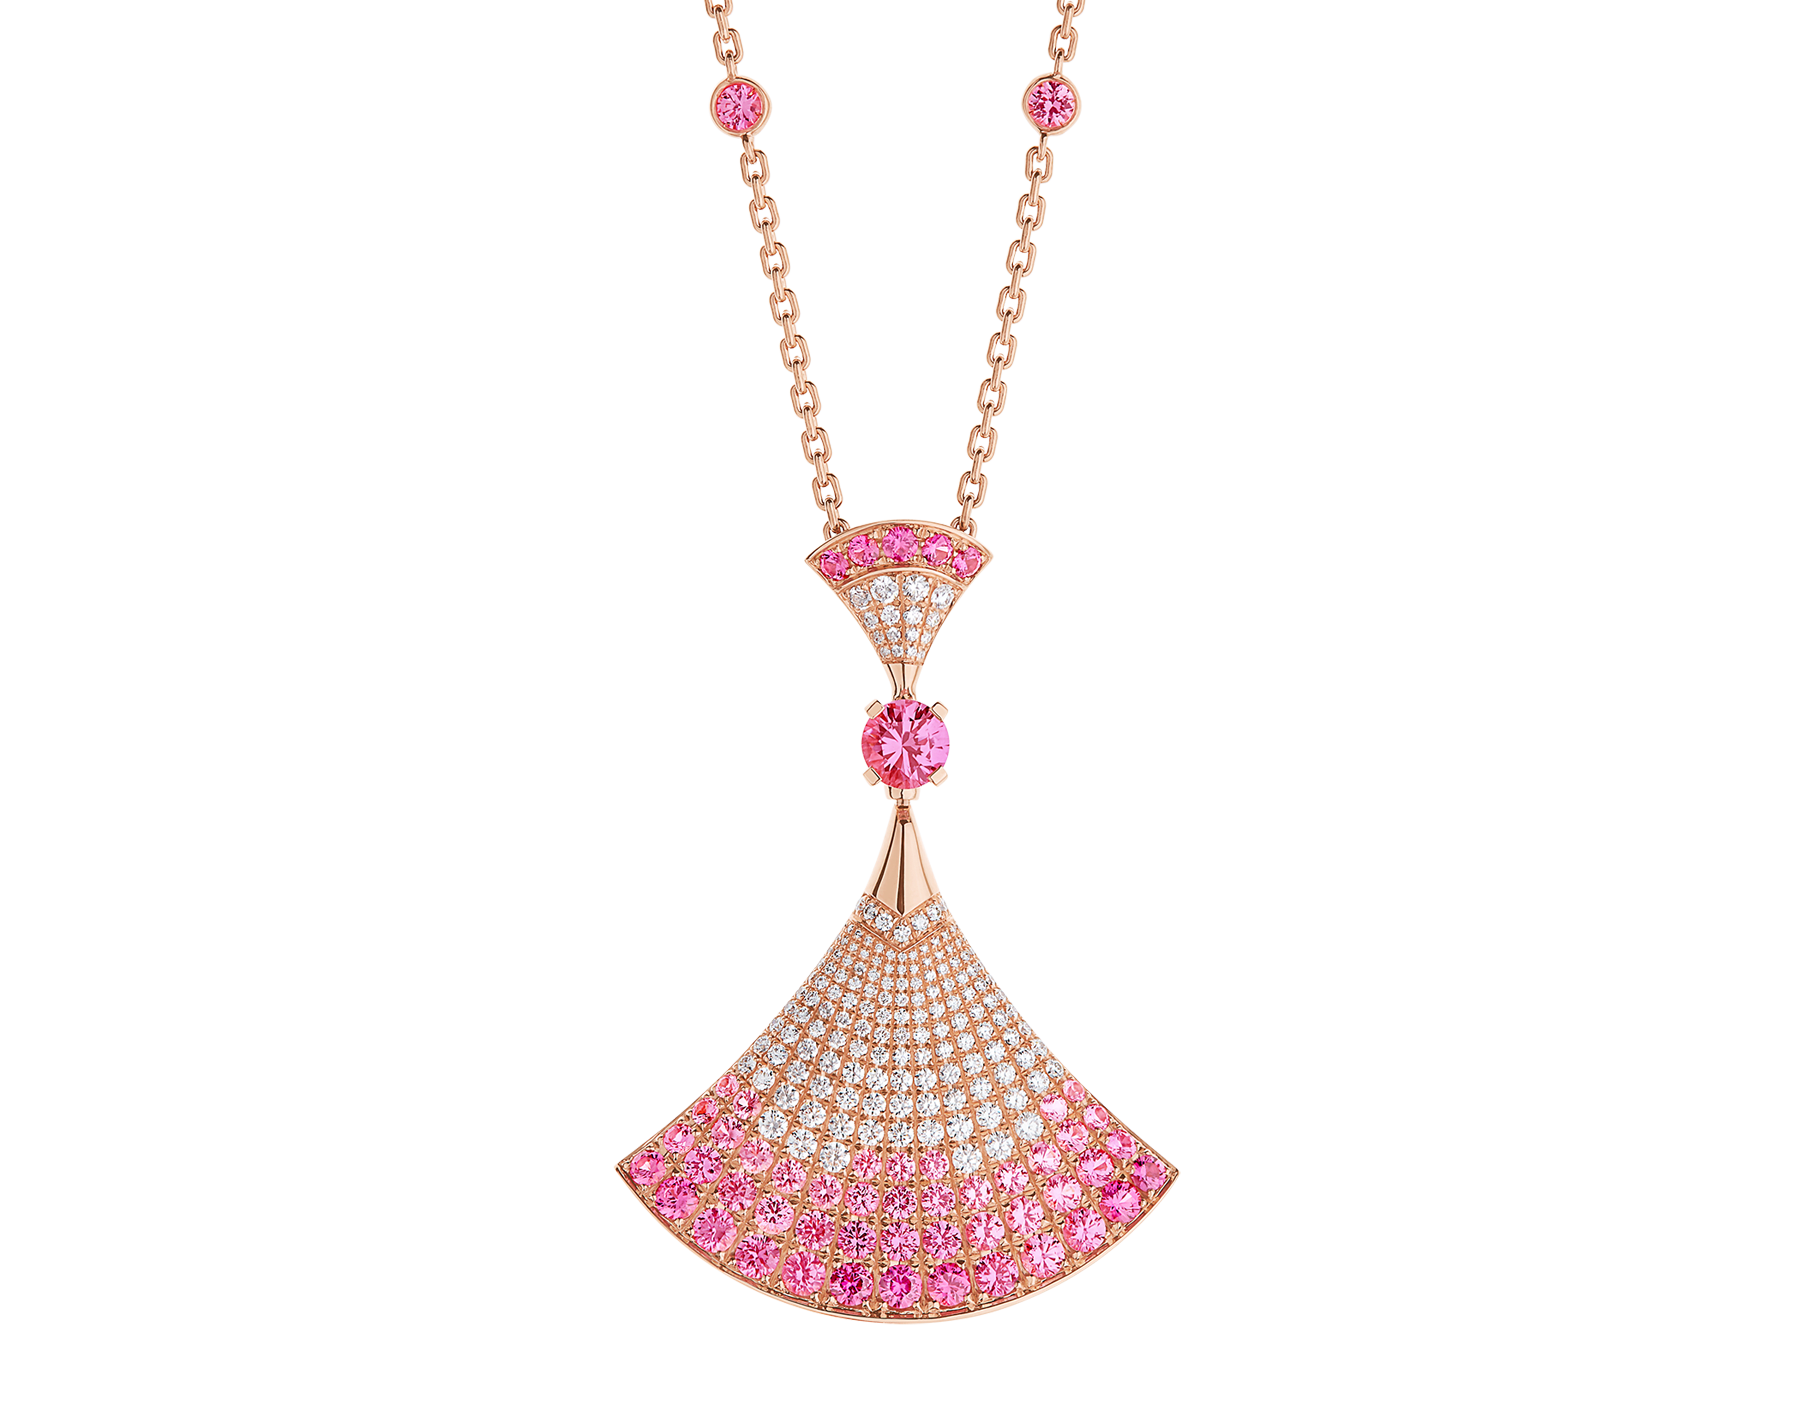 DIVAS' DREAM 18 kt rose gold pendant necklace set with one central and other round pink sapphires (3.53 ct), round rubies (0.81 ct) as well as round (0.16 ct) and pavé (0.85 ct) diamonds. 358114 image 1